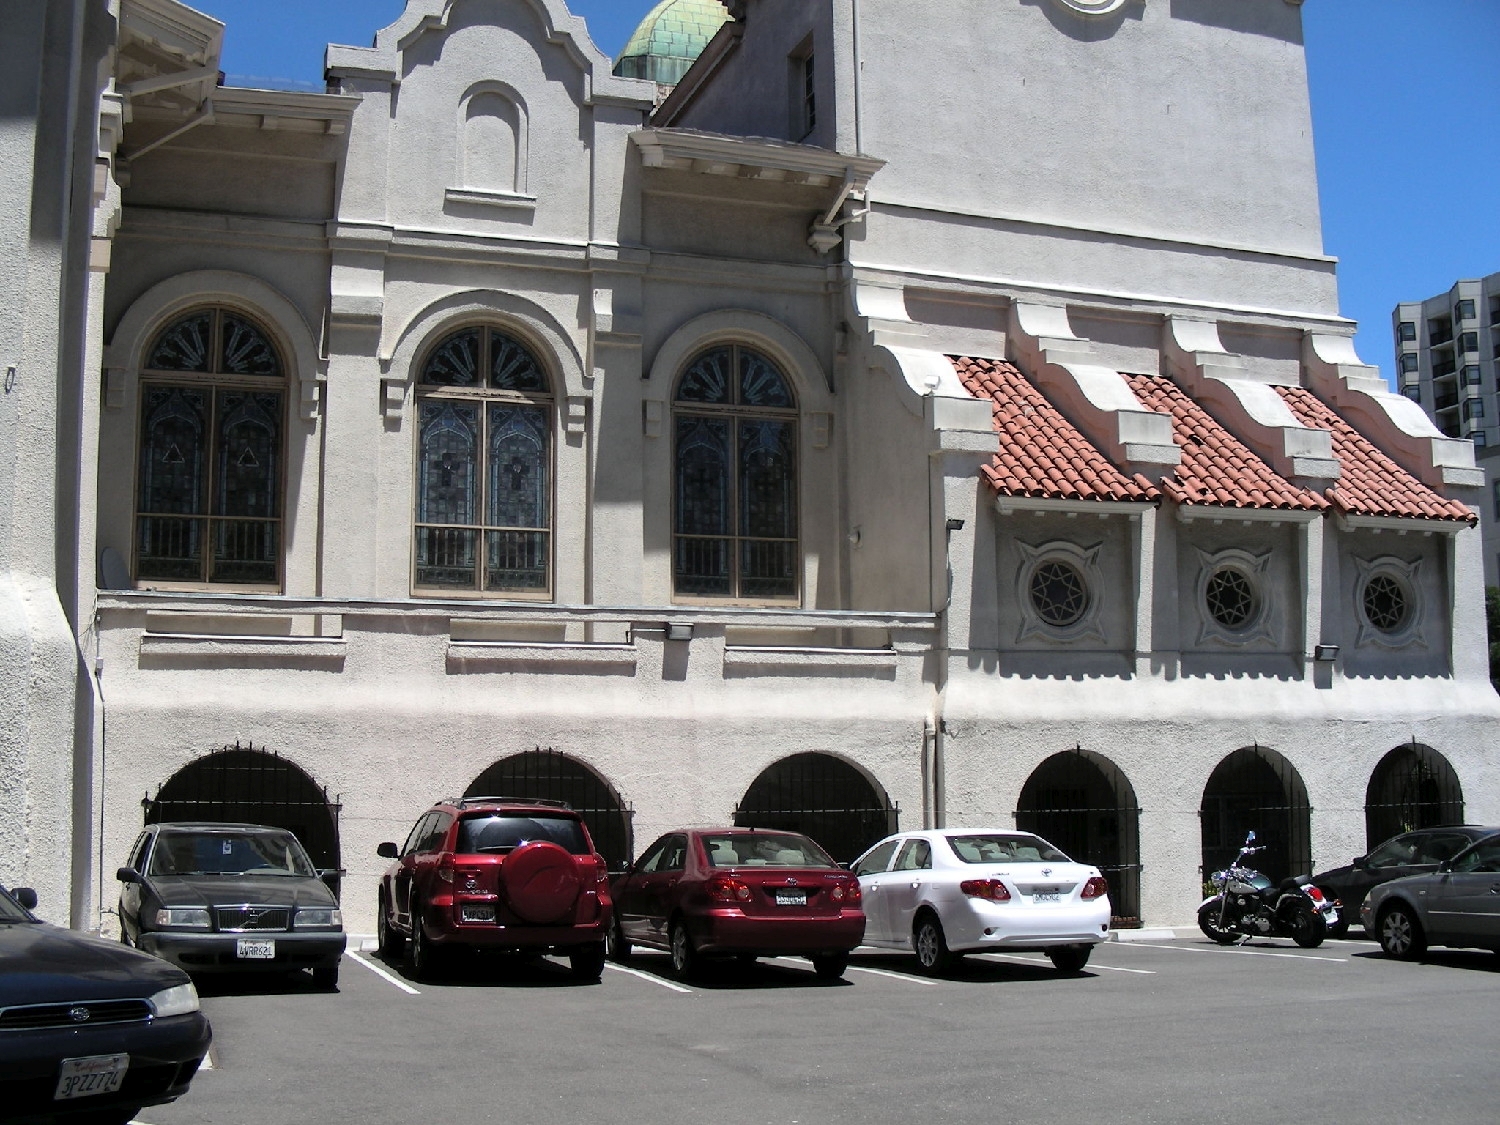 Southern facade and parking lot